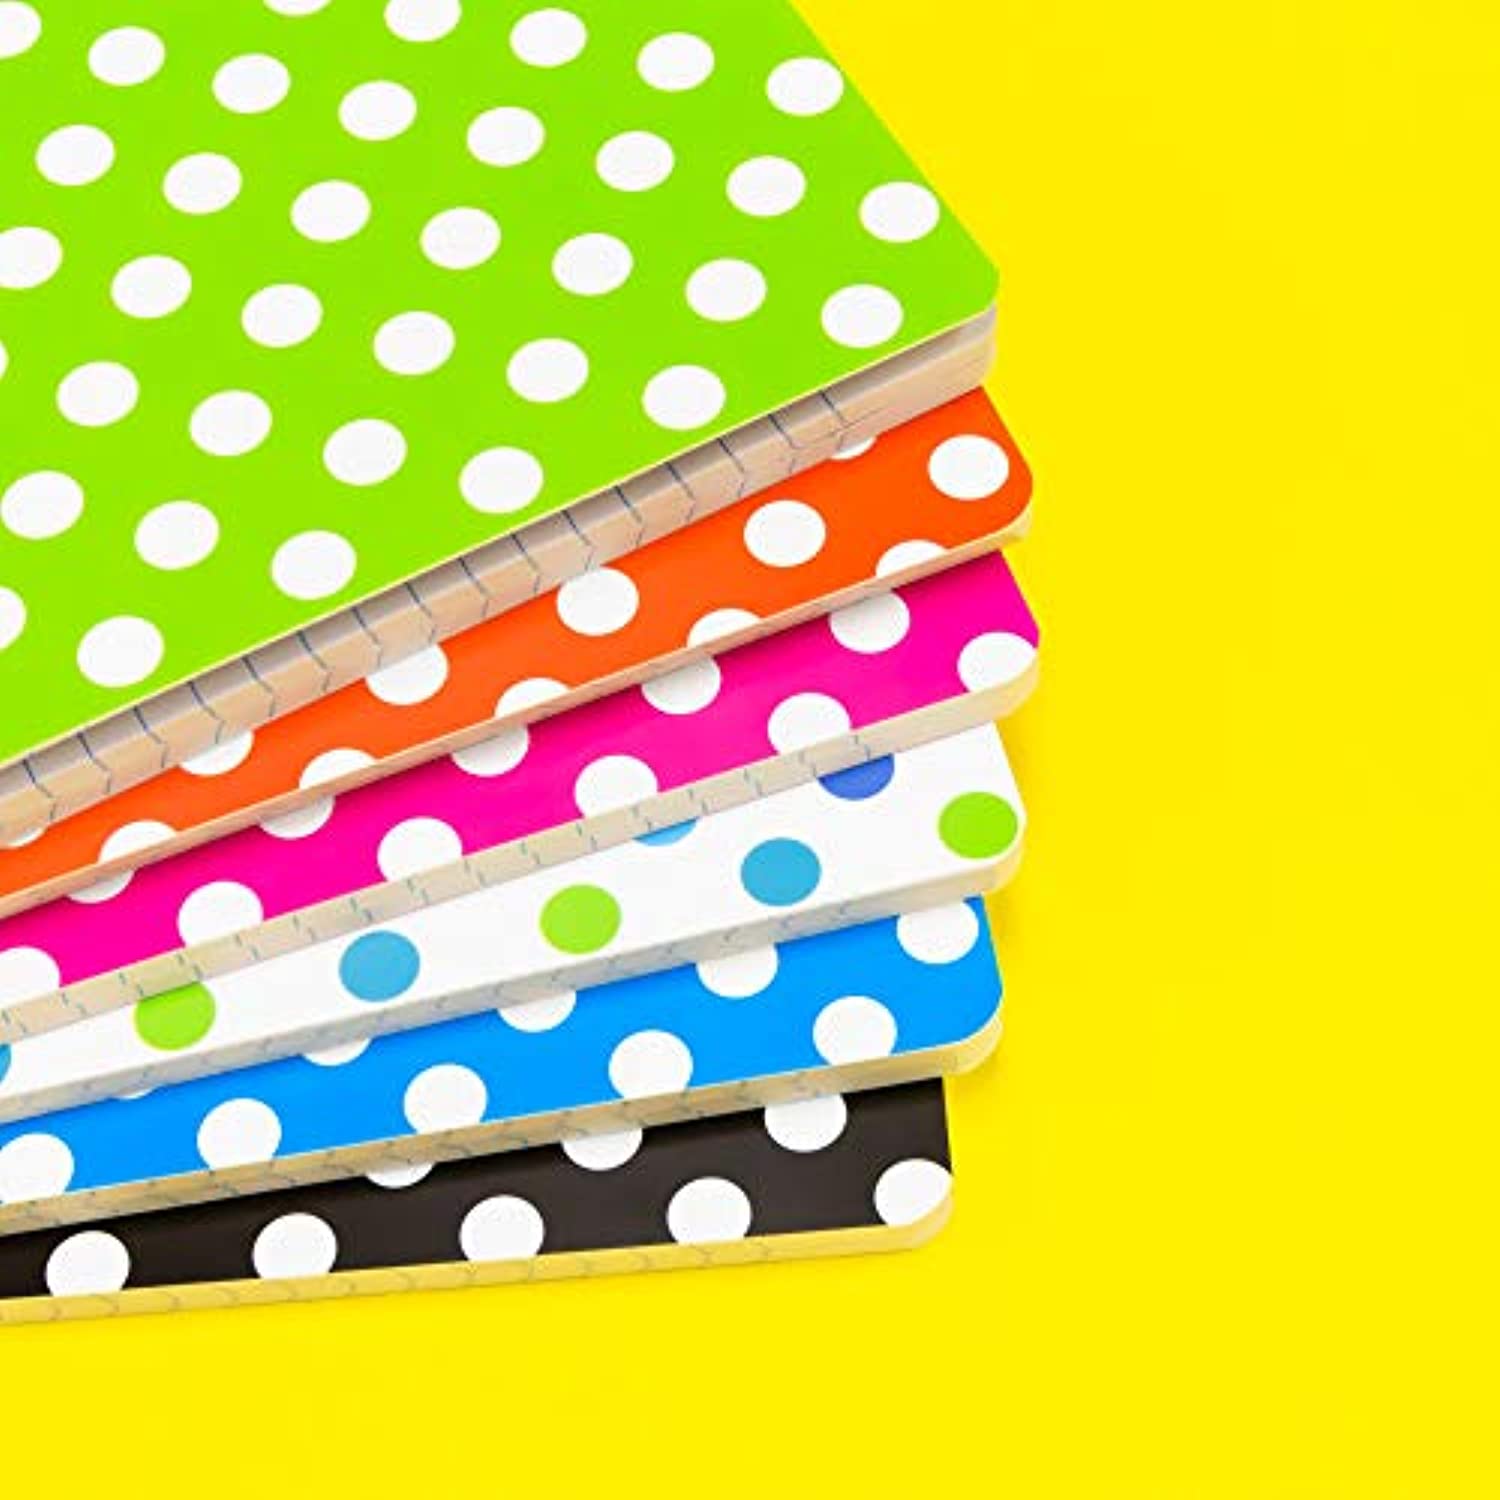 BAZIC 80 Sheets 5" x 7" Polka Dot Poly Cover College Ruled Personal Composition Book, Comp Books Writing Journal Notebook w/Lined Paper, for School Office Student Schedule, 6-Pack.